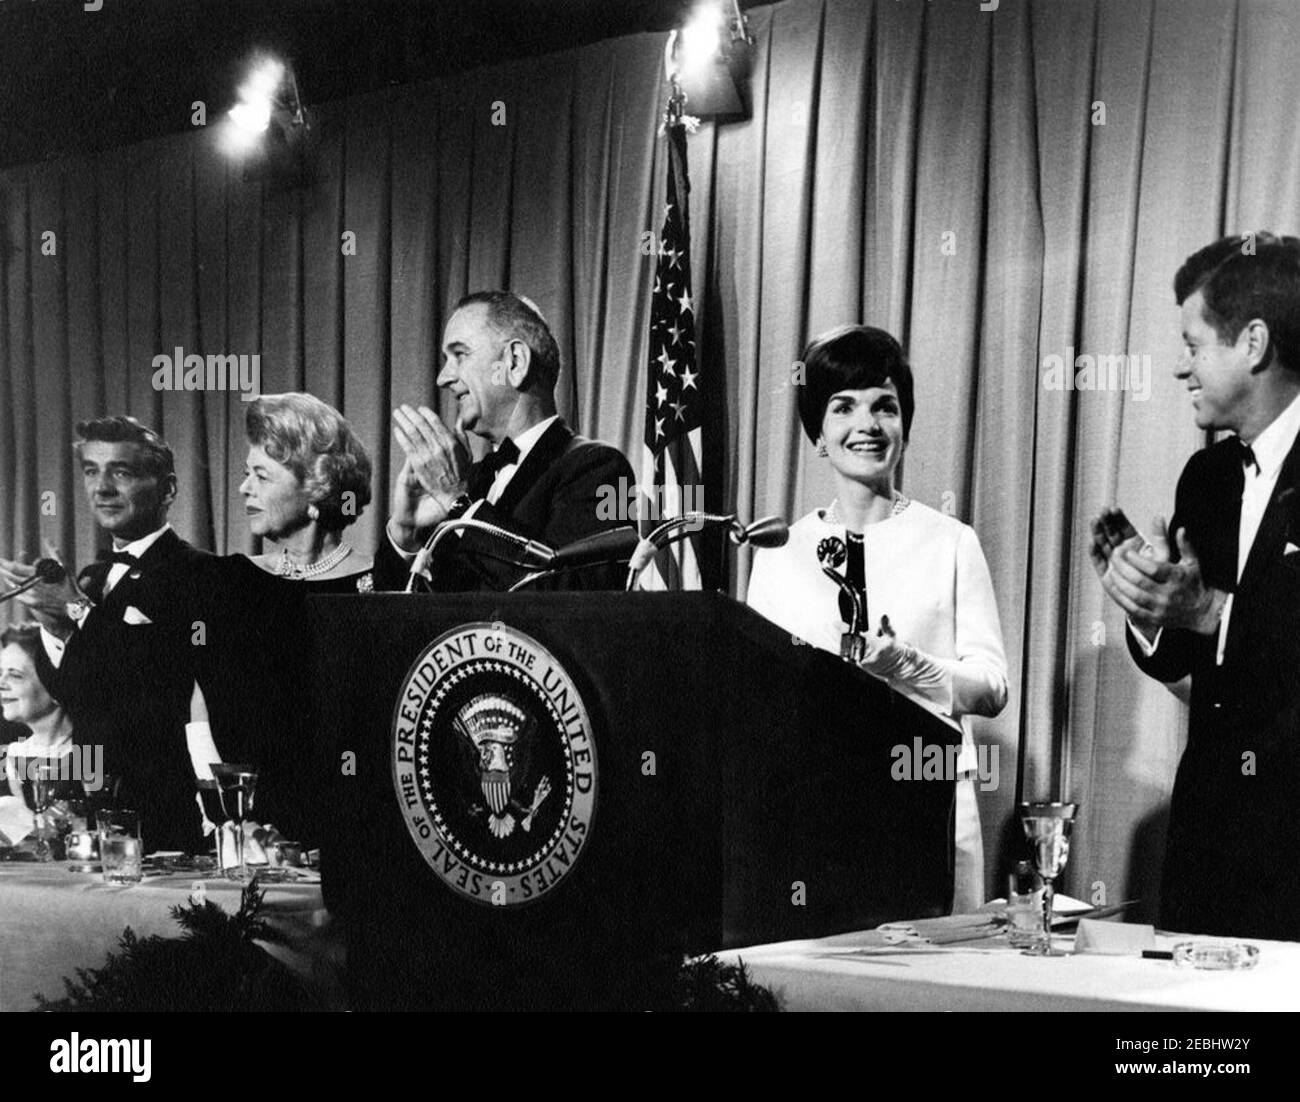 National Cultural Center Fund-raising benefit, 9:23PM. President John F. Kennedy, First Lady Jacqueline Kennedy, and others attend a fundraising dinner and closed-circuit telecast of u0022An American Pageant of the Artsu0022 for the National Cultural Center. Left to right: Nina Warren (seated), wife of Earl Warren, Chief Justice of the Supreme Court; master of ceremonies, composer and conductor Leonard Bernstein; chairman of the dinner committee for the National Cultural Center, Suzanne Gardner; Vice President Lyndon B. Johnson; Mrs. Kennedy; and President Kennedy. National Guard Armory, Was Stock Photo